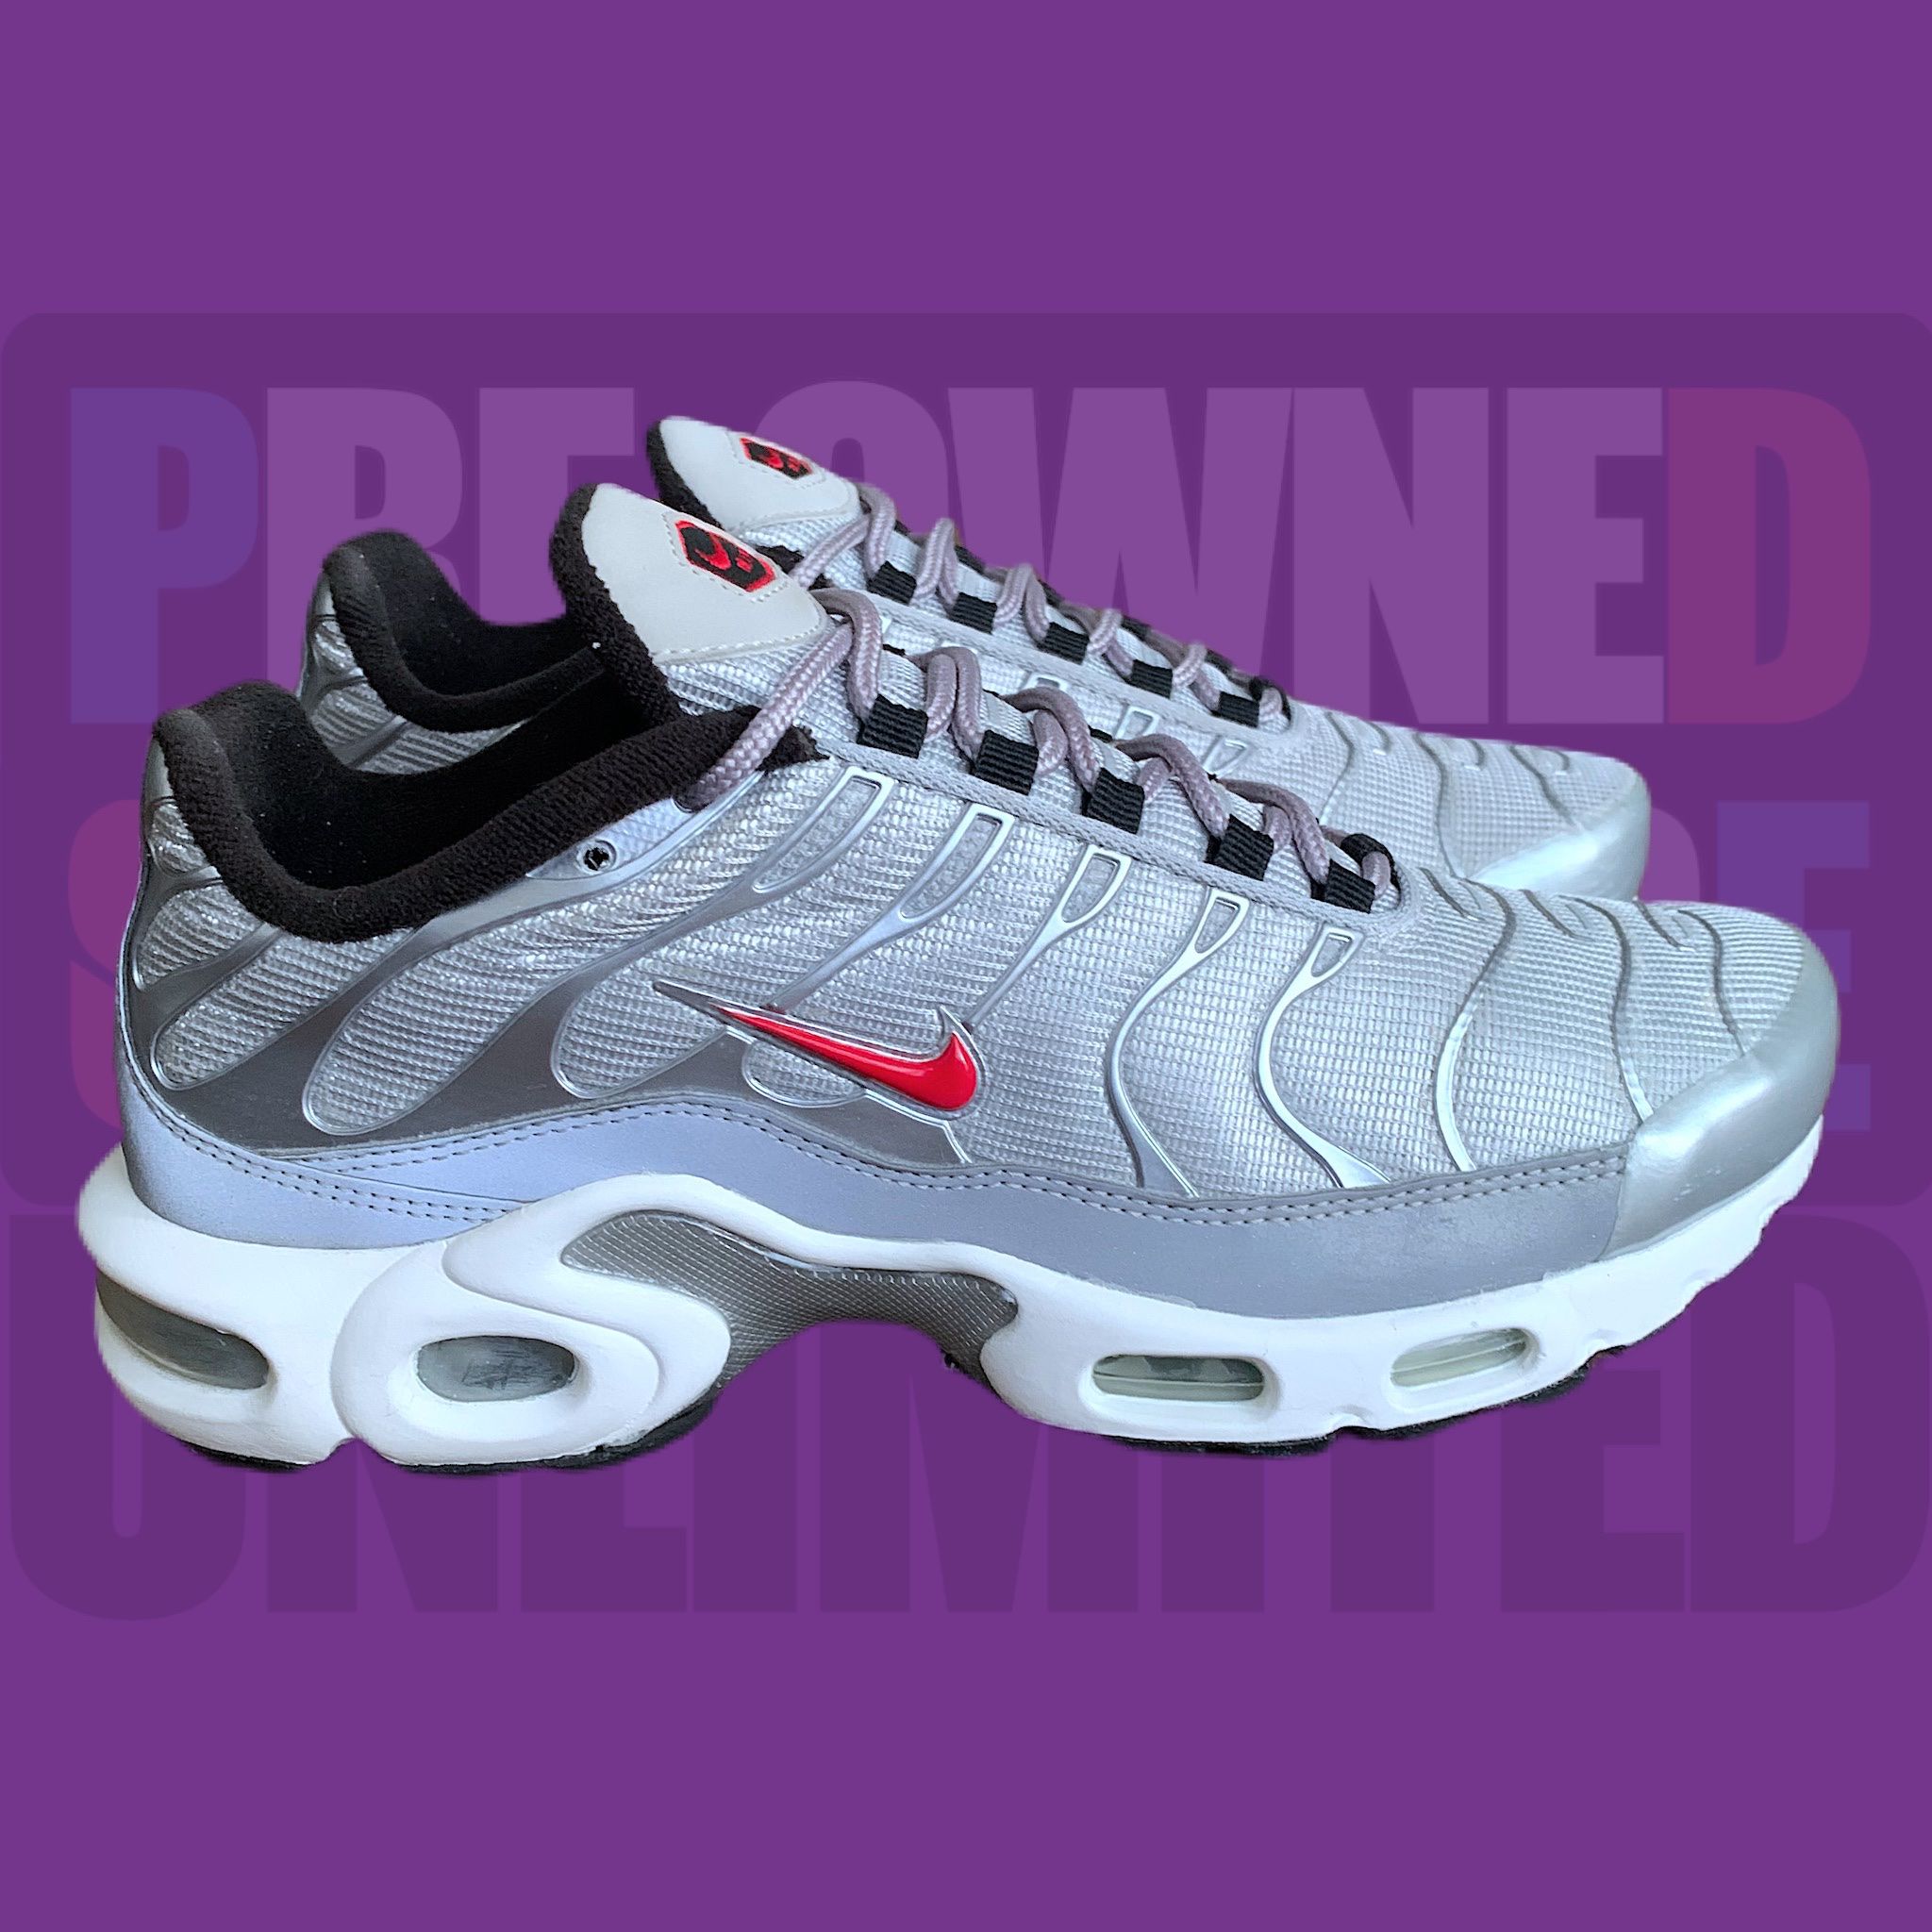 Wmns Nike Air Max Plus for Sale in Los Angeles, CA - OfferUp